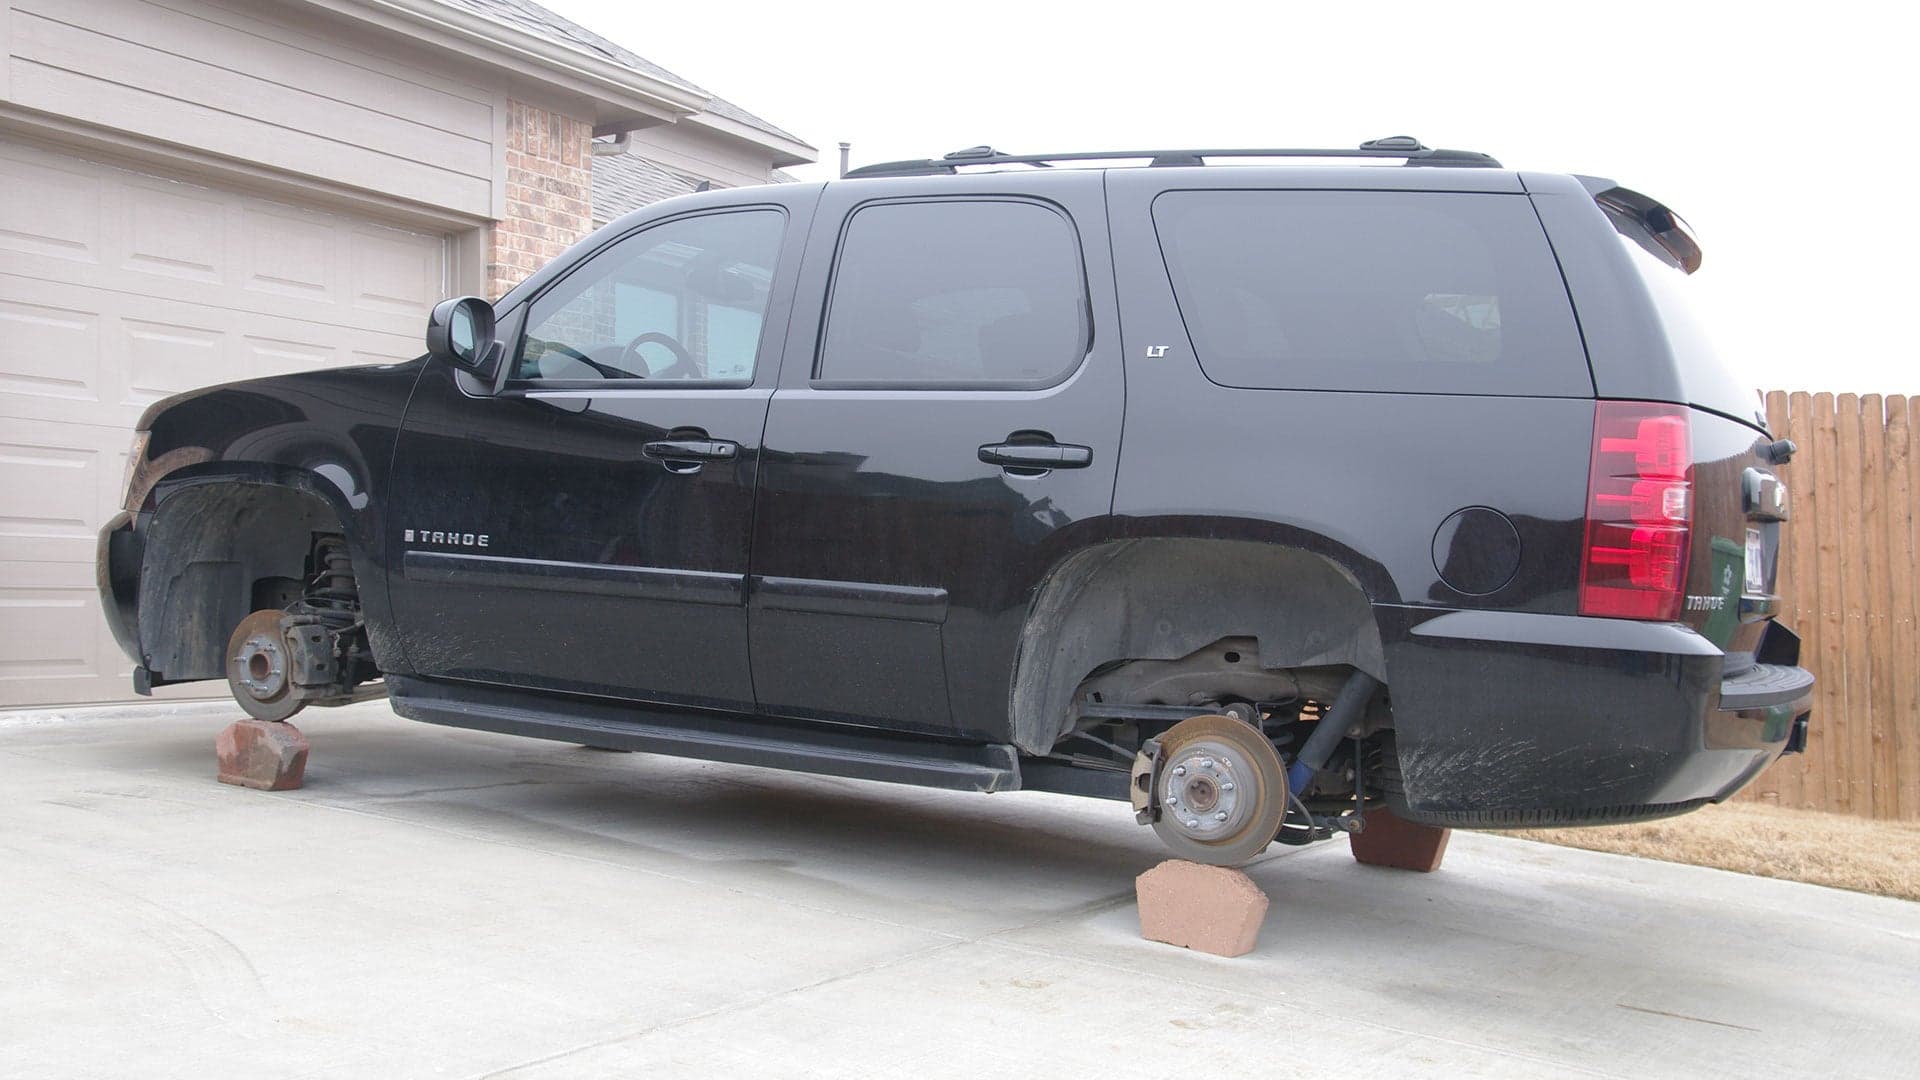 Texas Thieves Steal $250K in Wheels and Tires in Four Hours